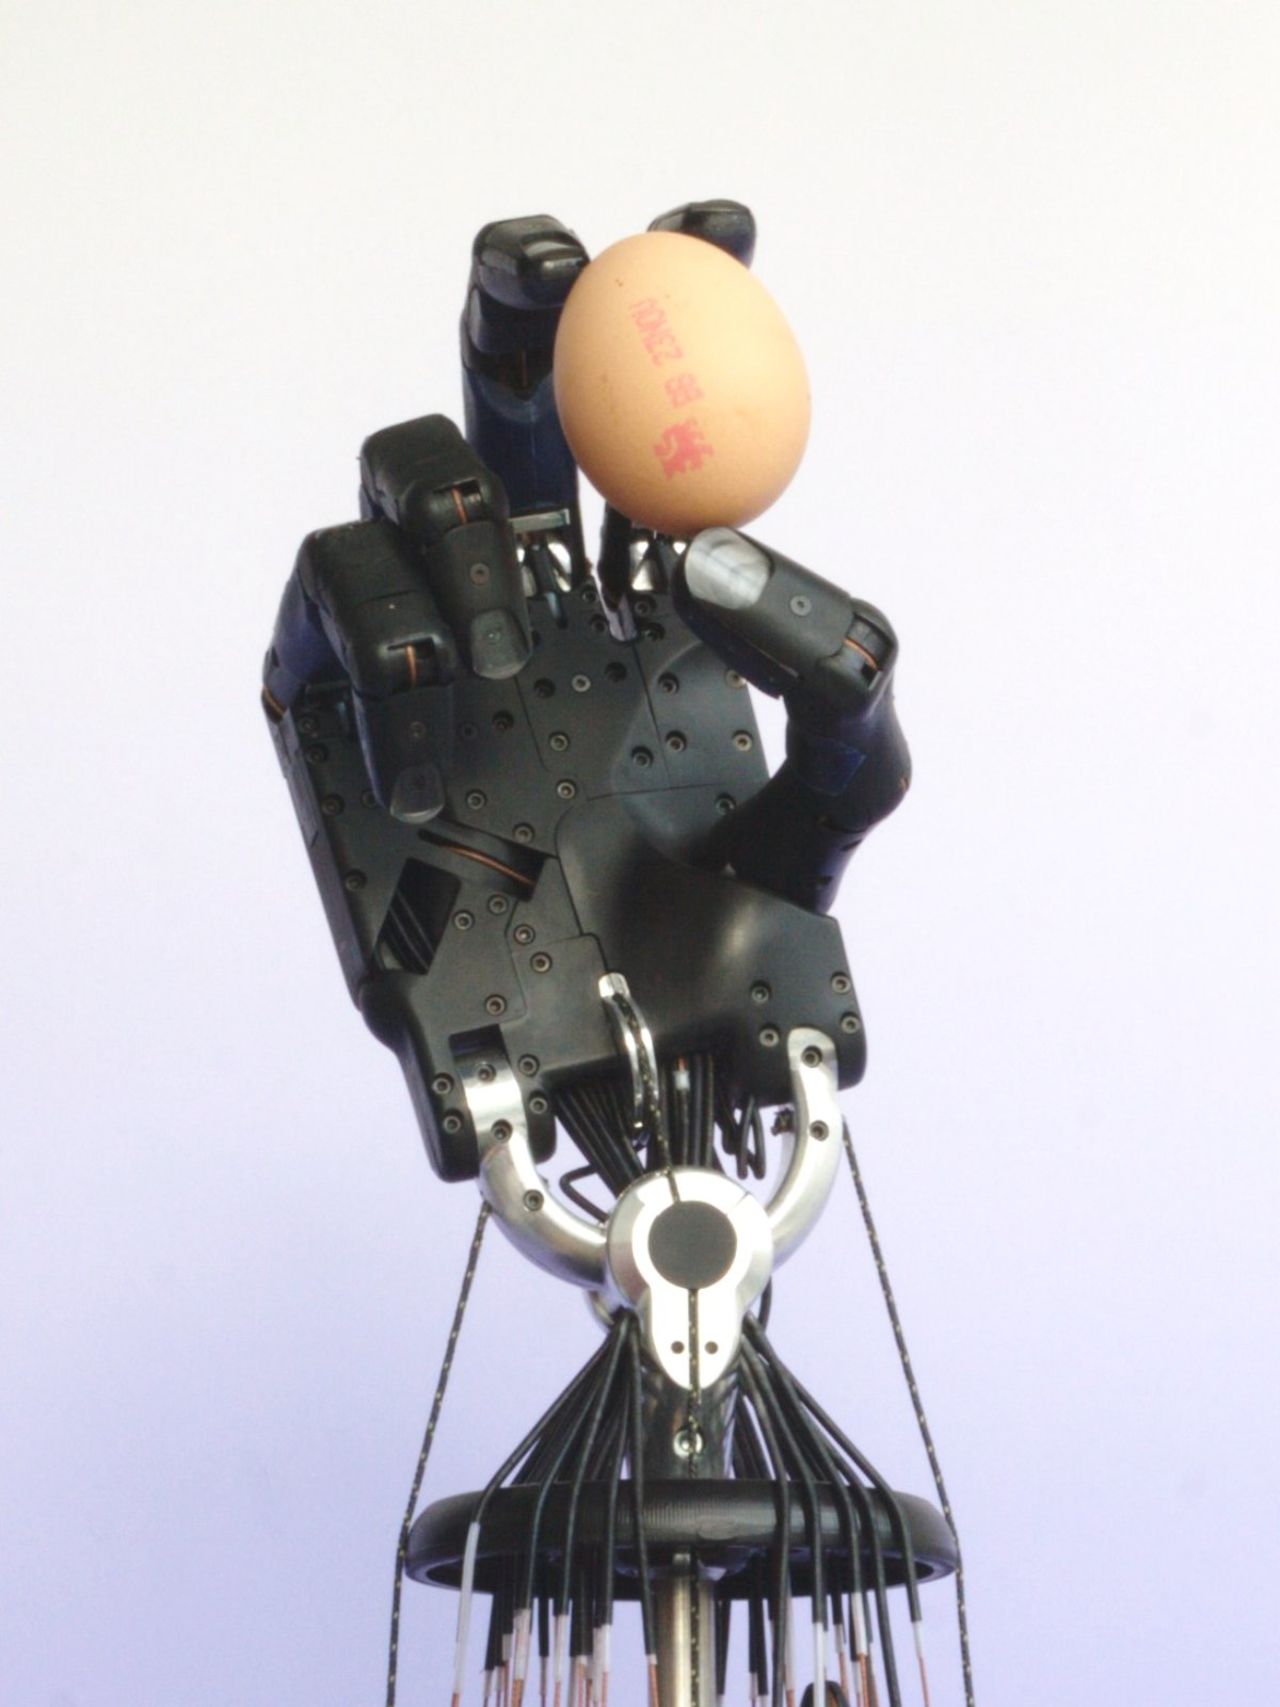 The "Shadow Dexterous Hand" is the work of the Shadow Robot Company. It says the mechanized hand can mimic all the movements of a human hand and can be fitted to various robots.